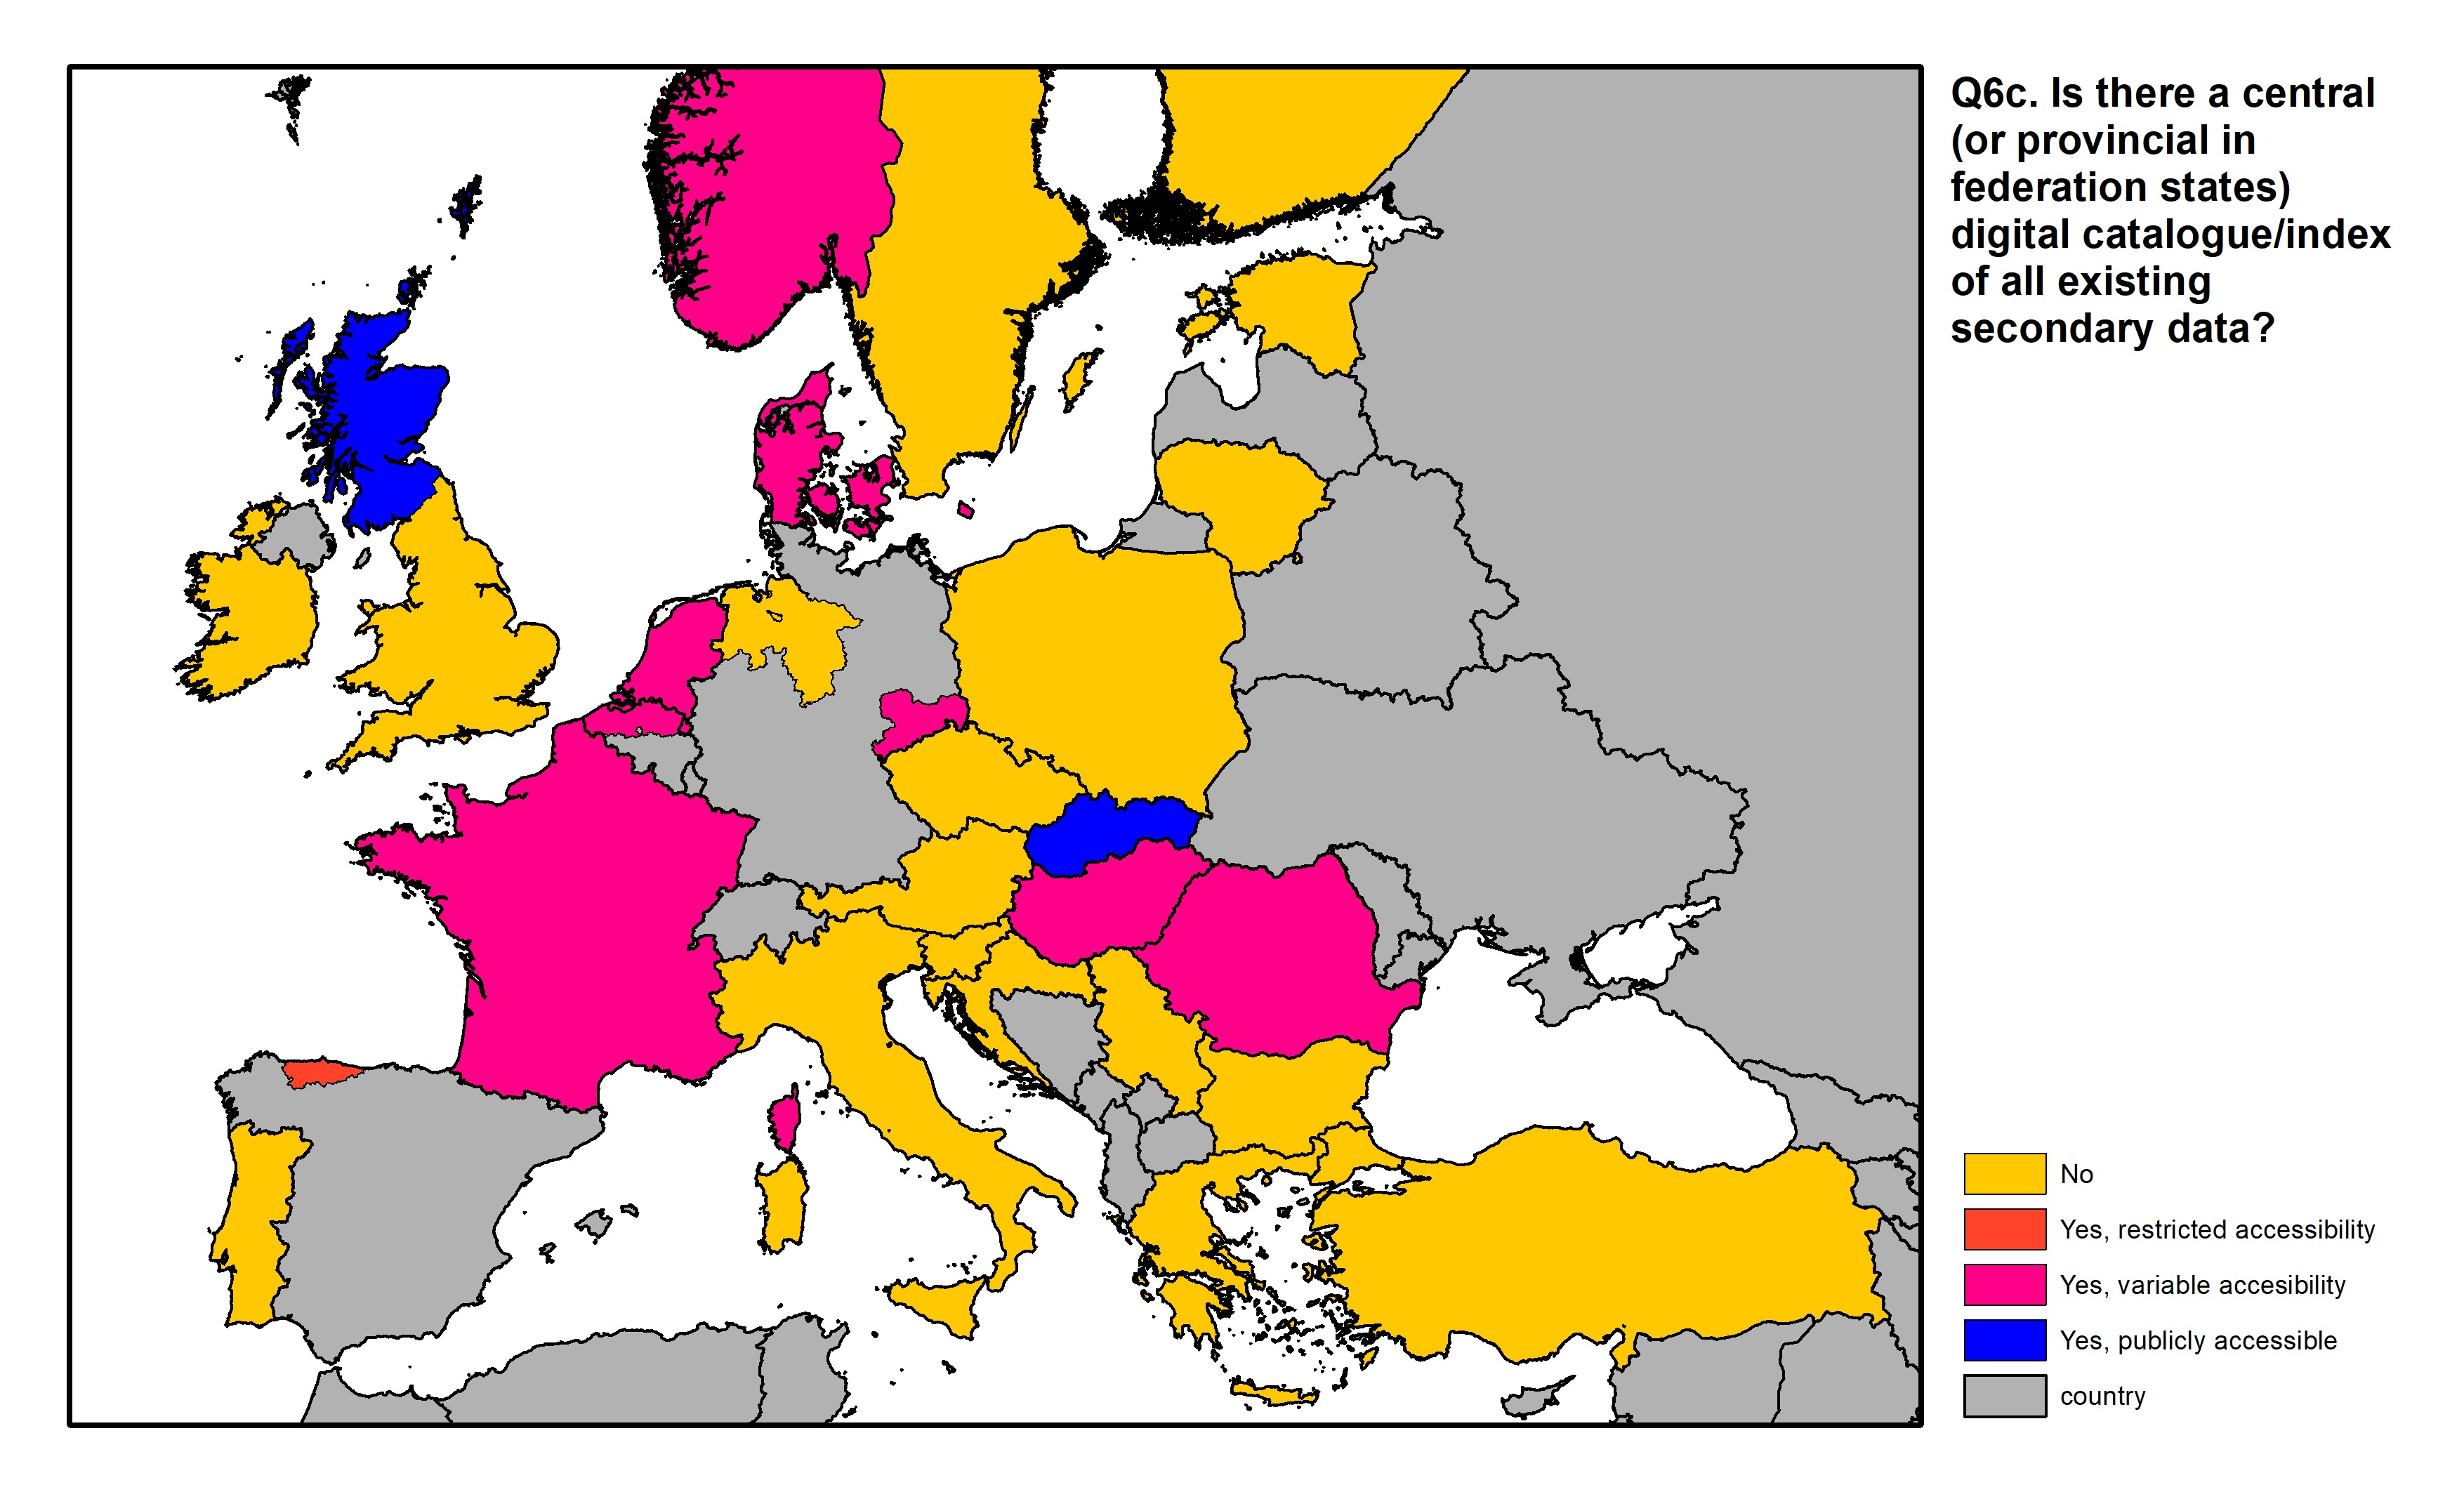 Figure 20: a map of Europe showing countries and regions in colour based on response rates to the survey question.